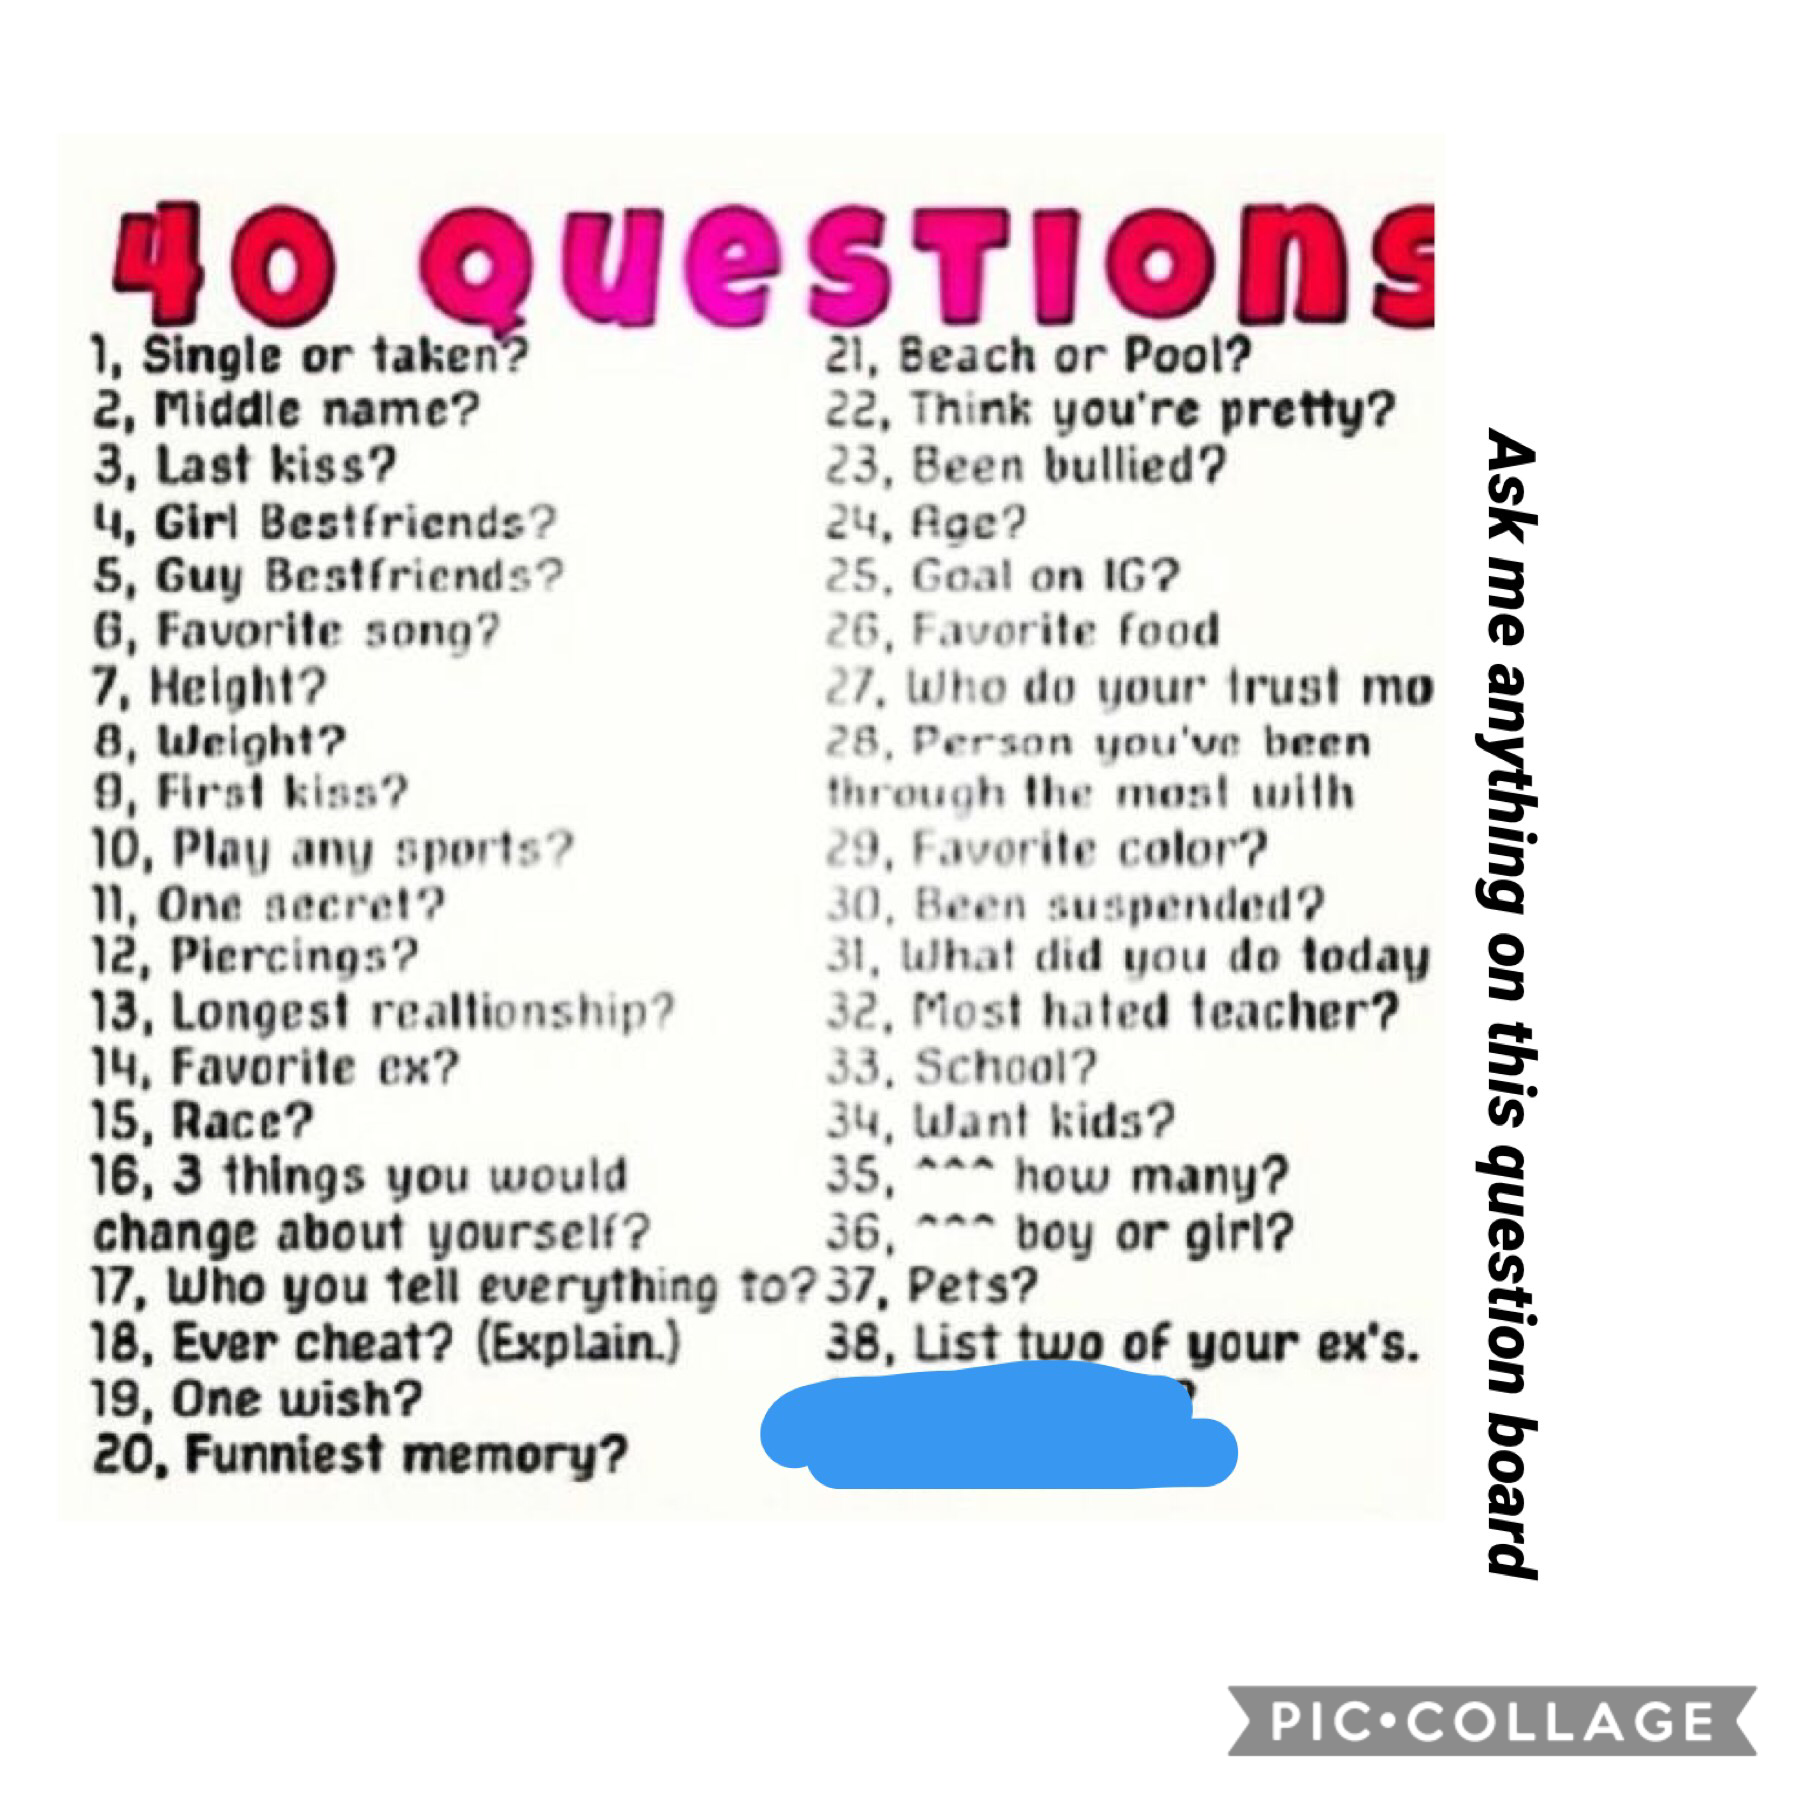 Ask me any question 😀😀